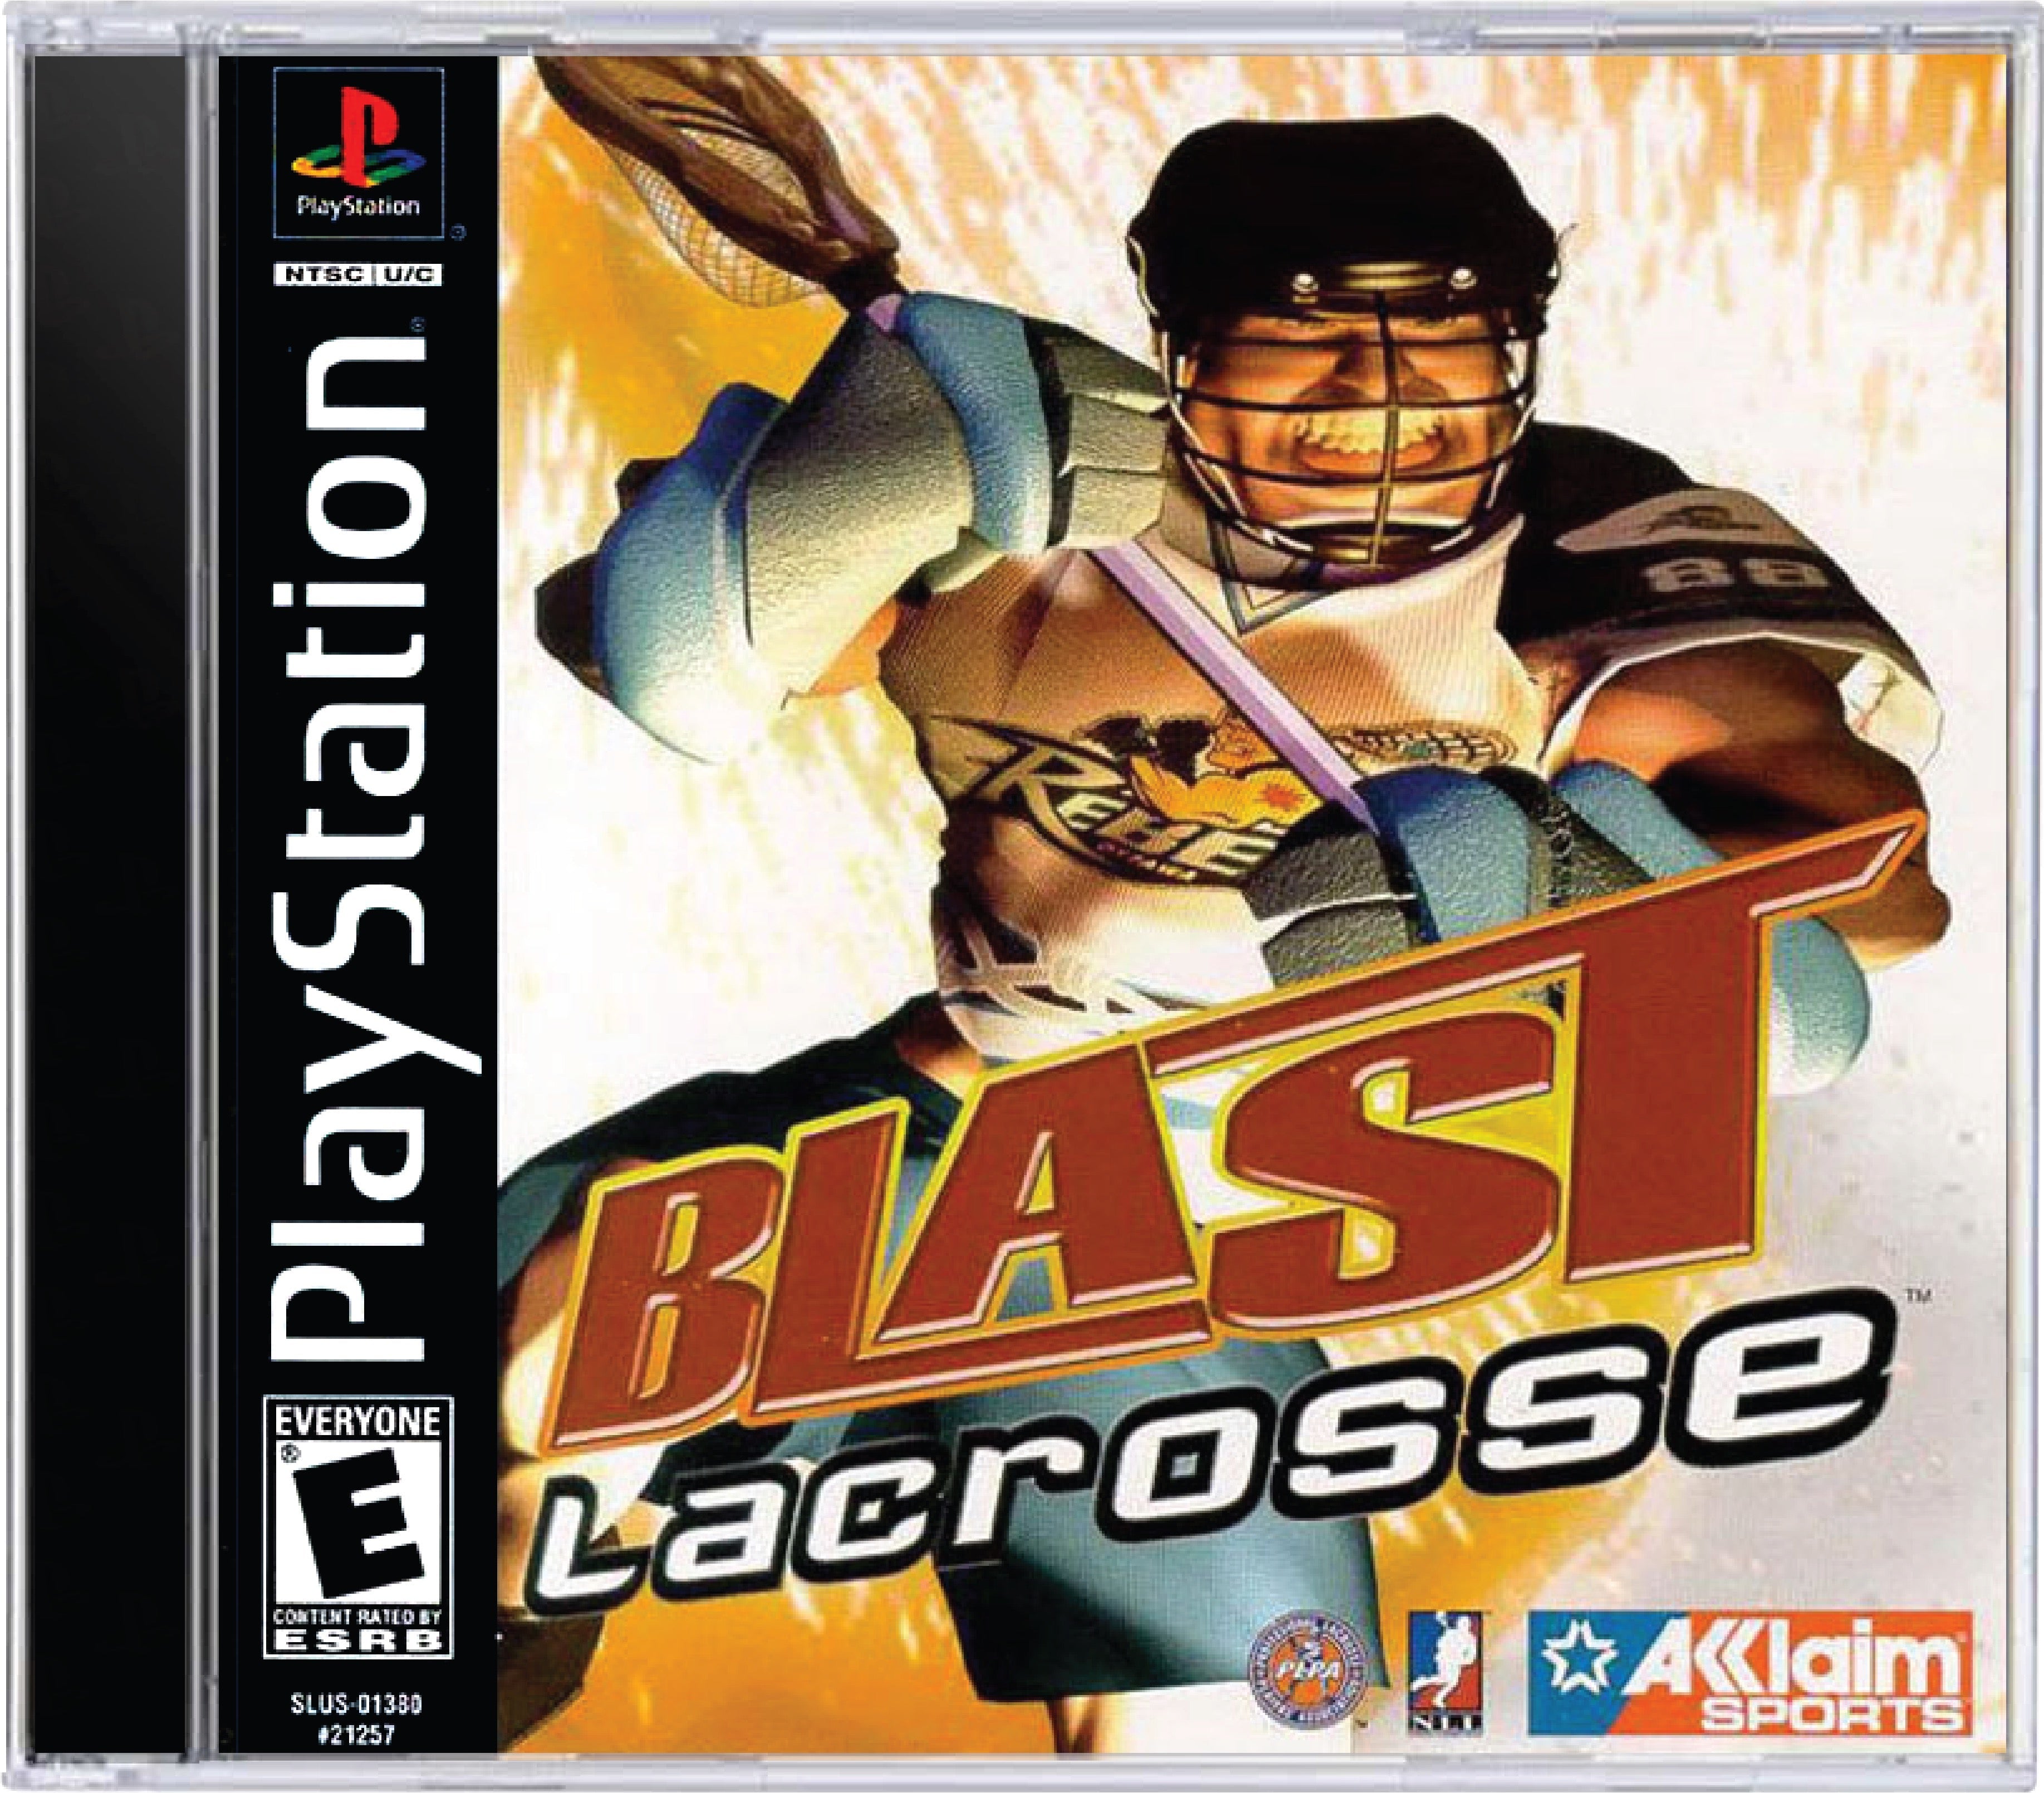 Blast Lacrosse Cover Art and Product Photo